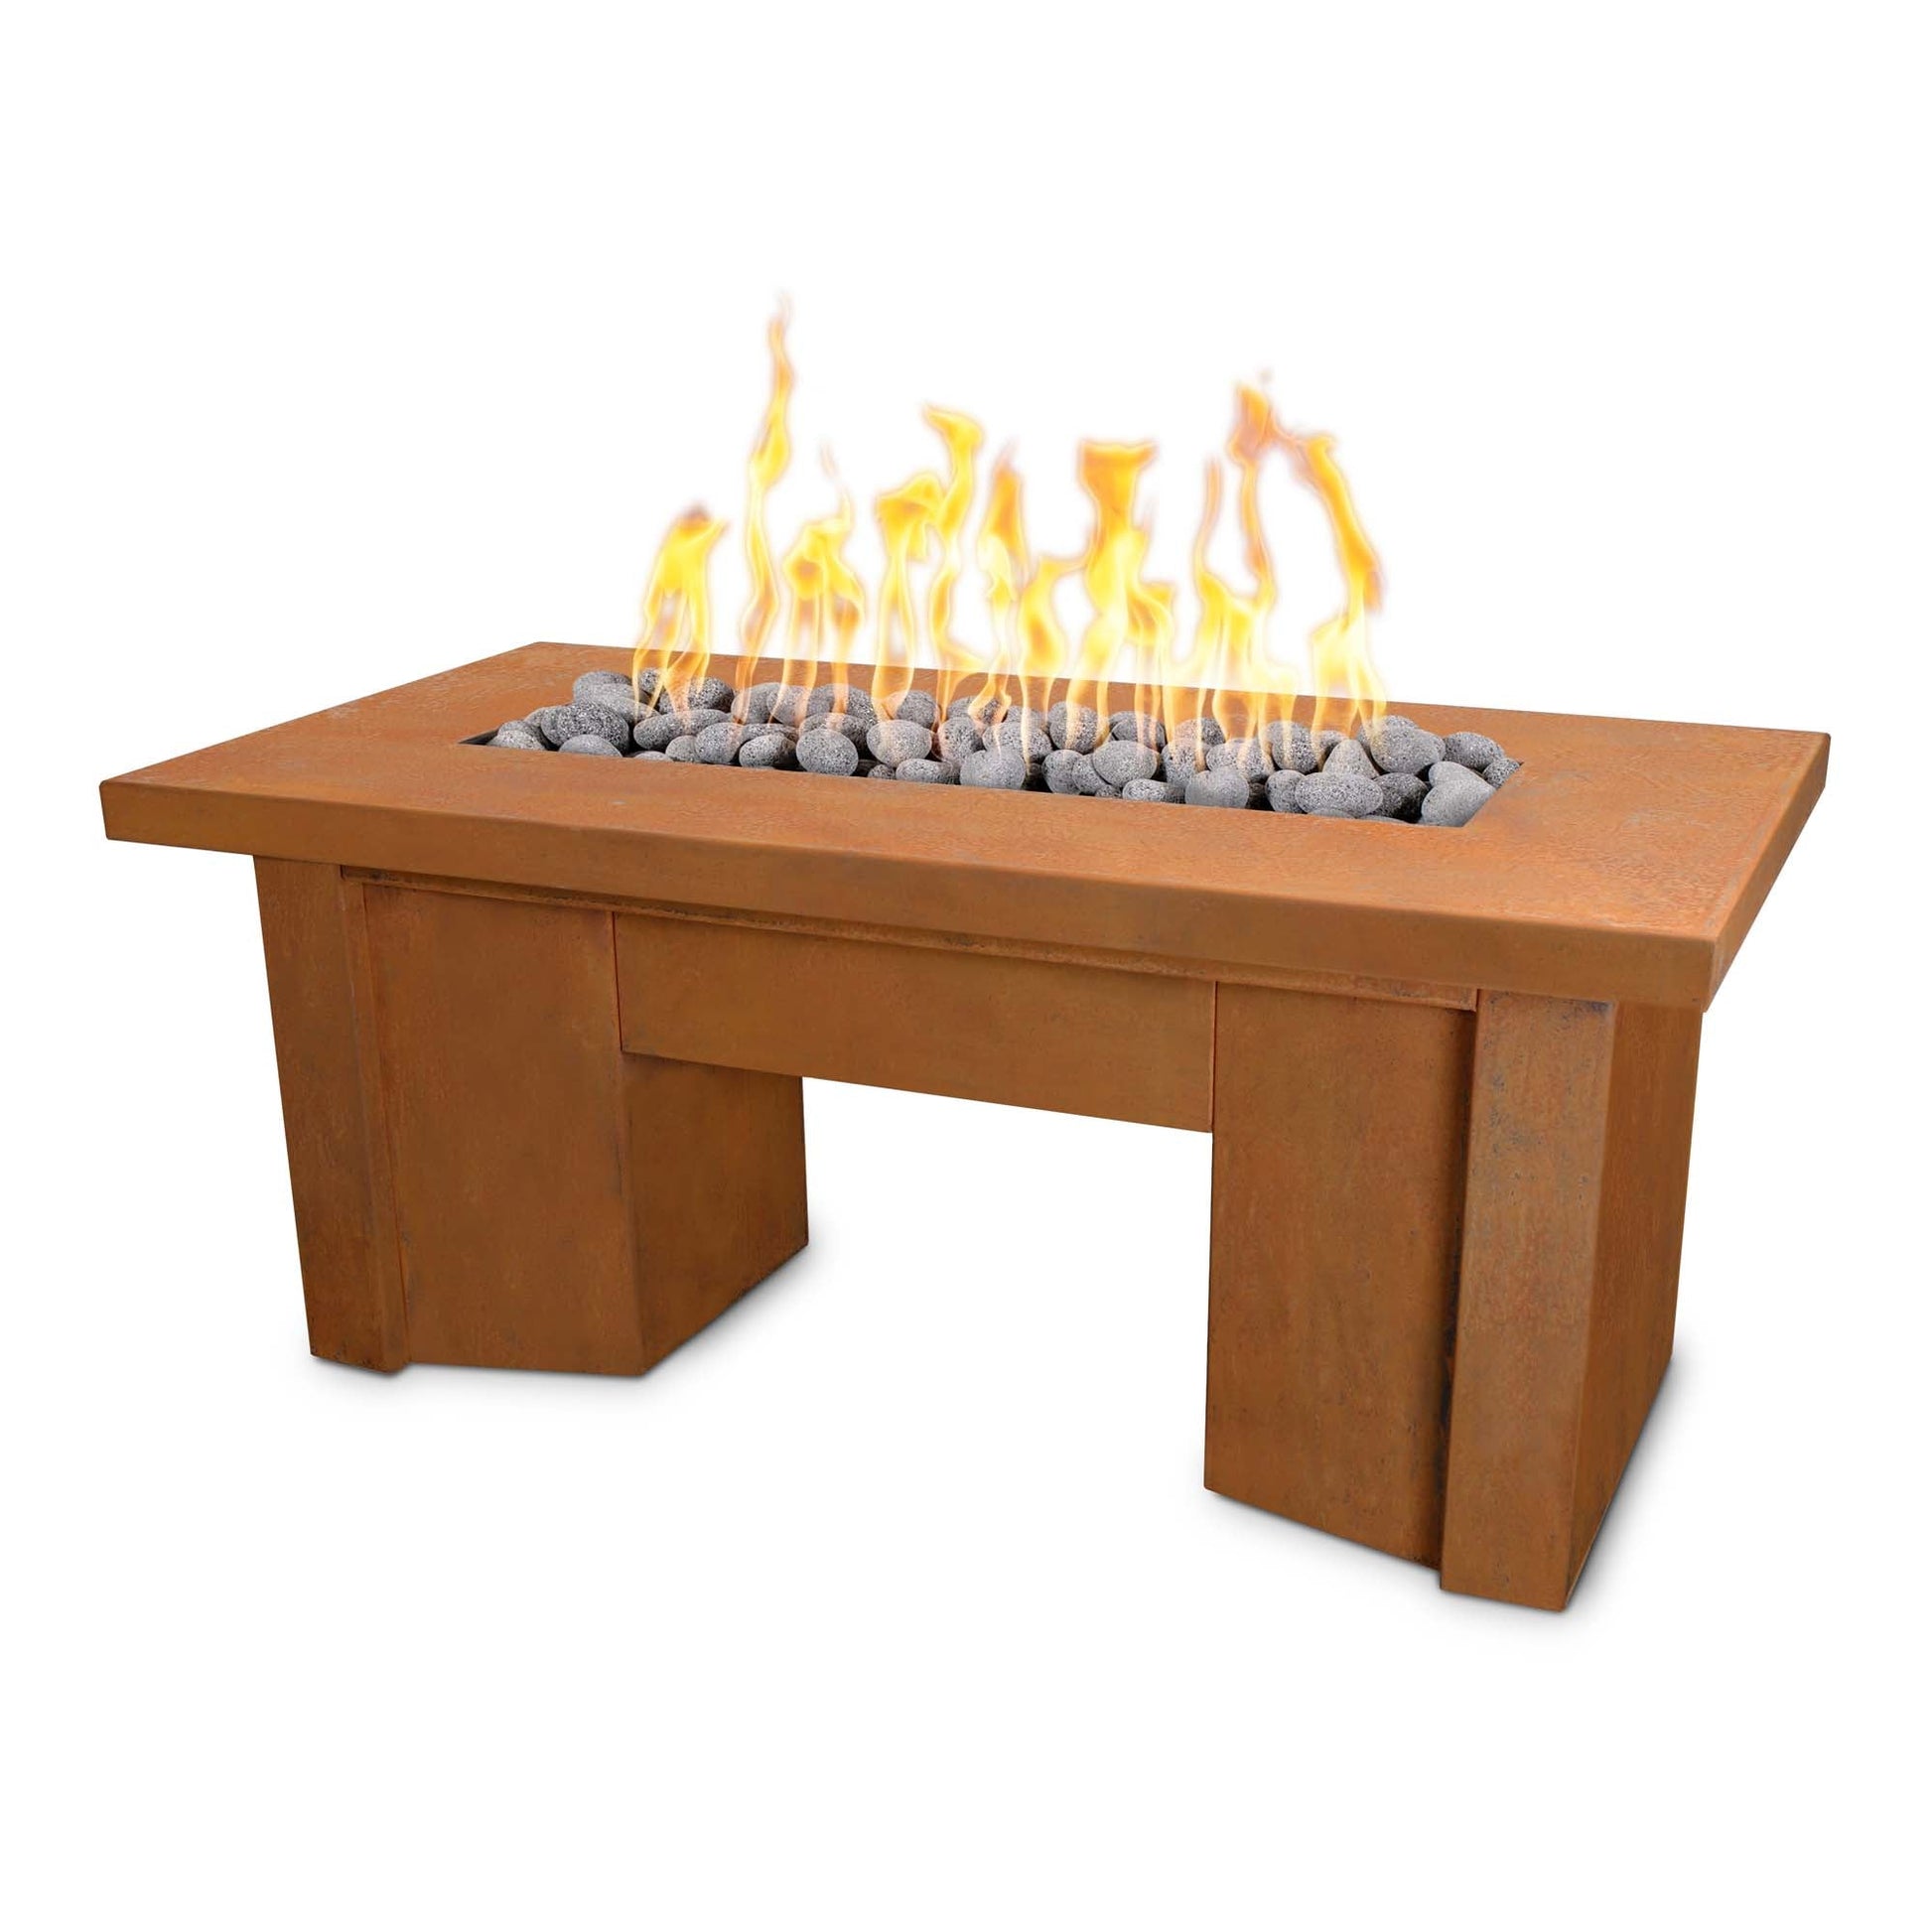 The Outdoor Plus Rectangular Alameda 60" Corten Steel Natural Gas Fire Pit with Match Lit Ignition